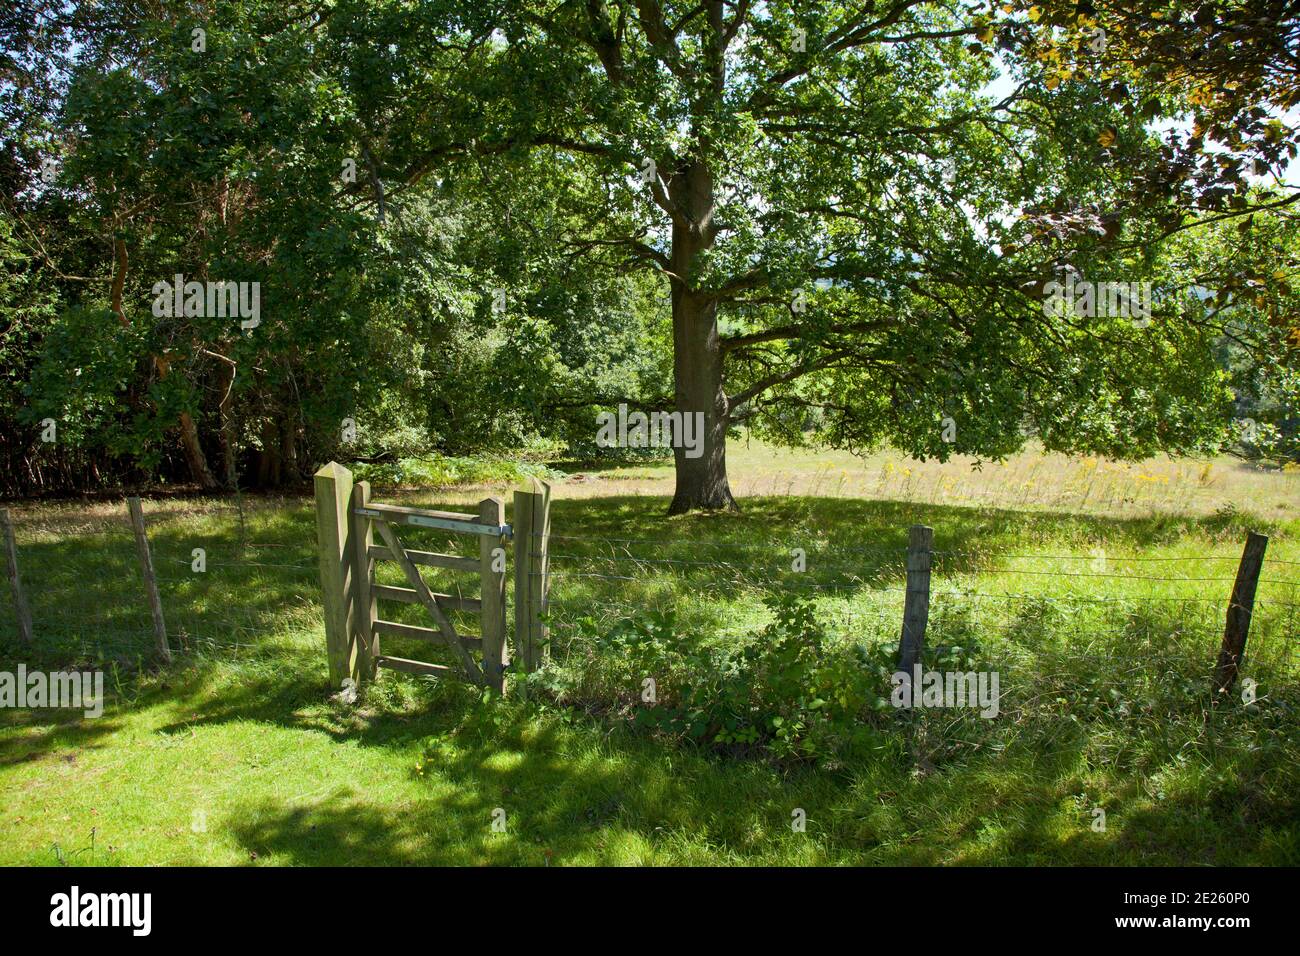 Wooden garden gate into park land with oak tree in summer Stock Photo